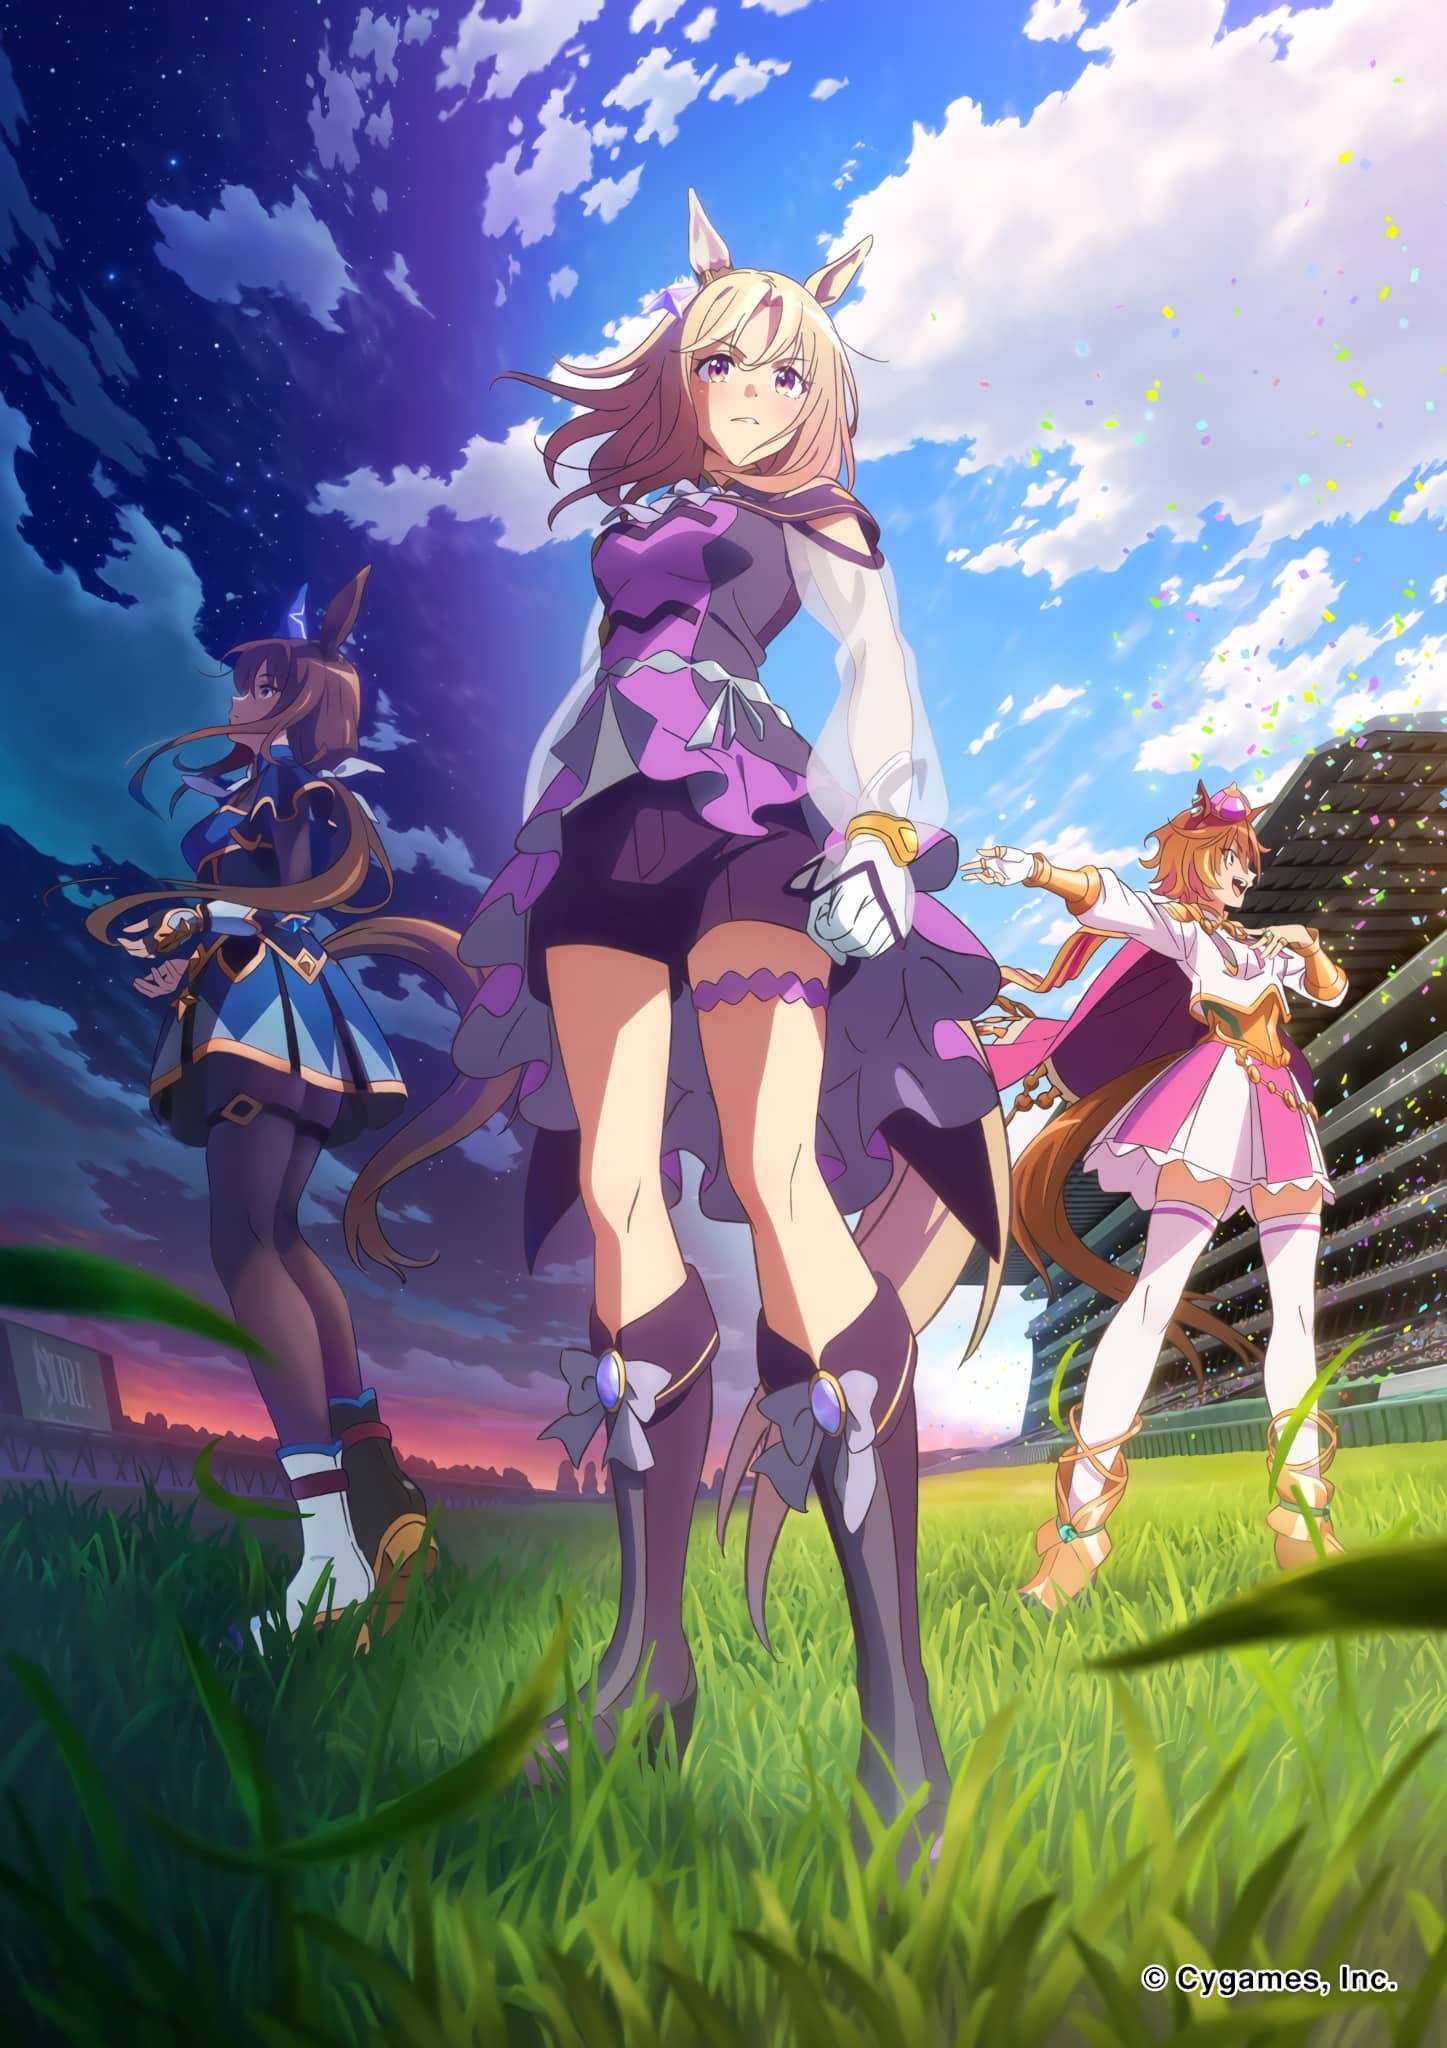 [LoliHouse] 赛马娘 Pretty Derby：Road to the Top/Uma Musume Pretty Derby: Road to the Top - 03 [WebRip 1080p HEVC-10bit AAC][简繁内封]